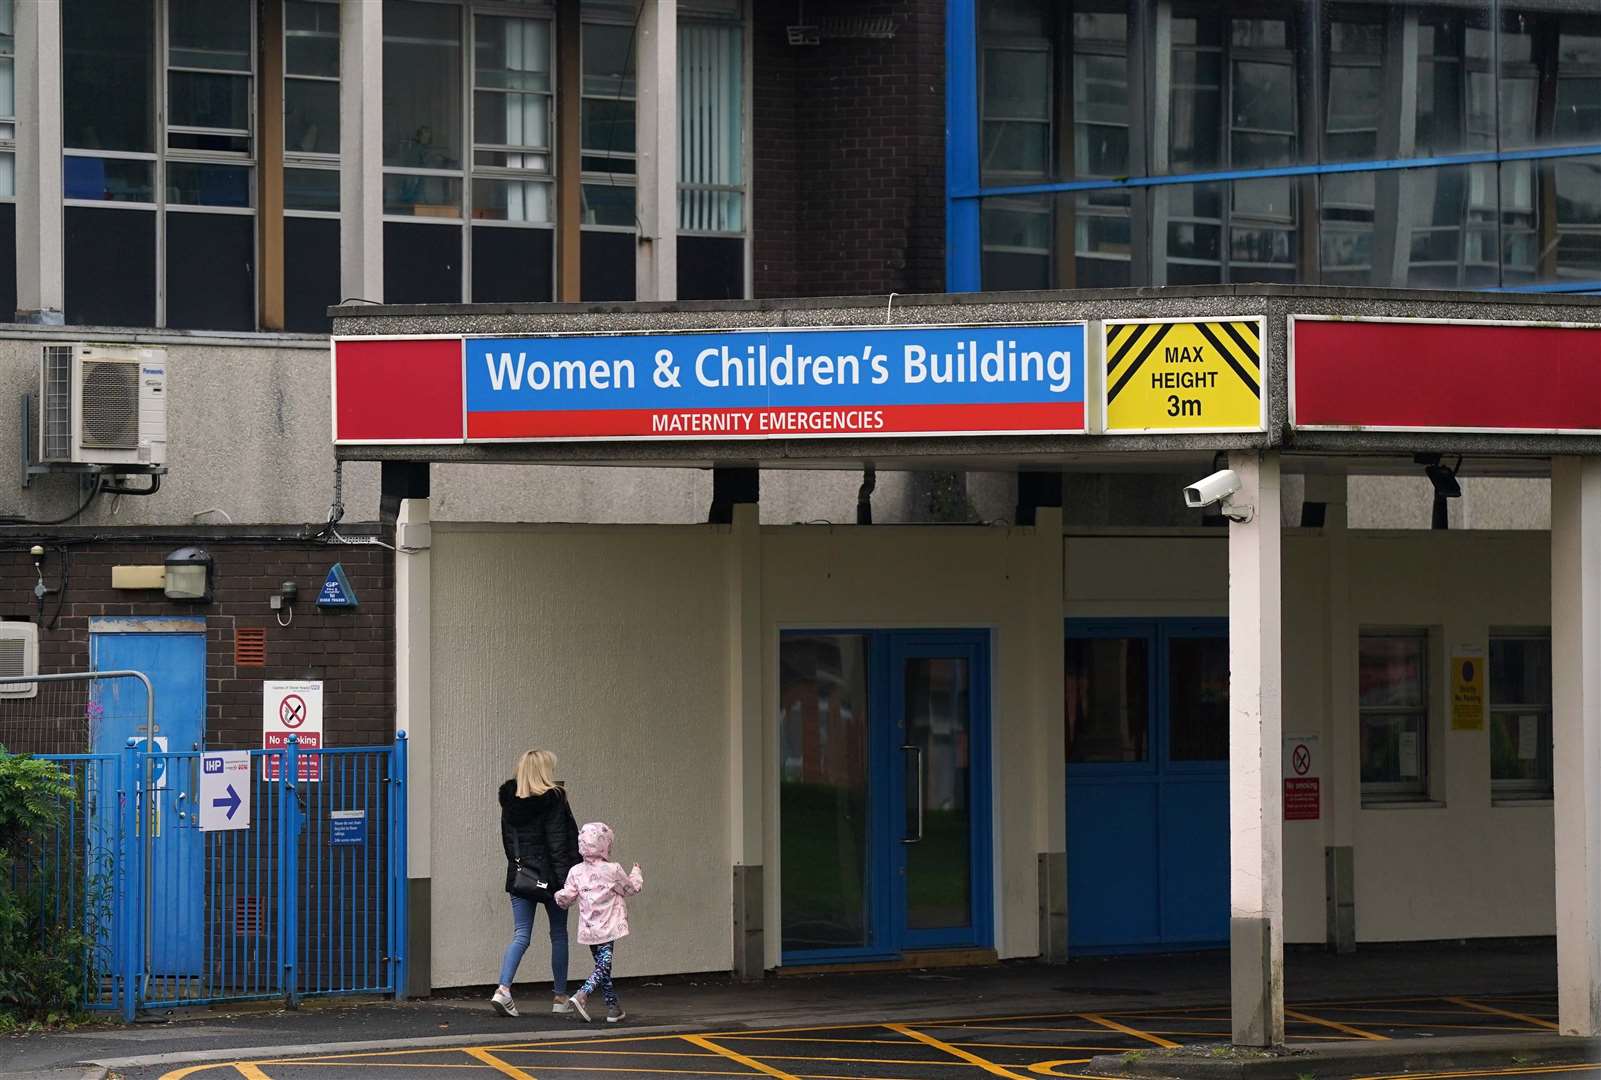 The hearing was told that 188 requests for information had been made to individuals from the Countess of Chester hospital including midwives, nurses, doctors, managers and members of the hospital board (Jacob King/PA)